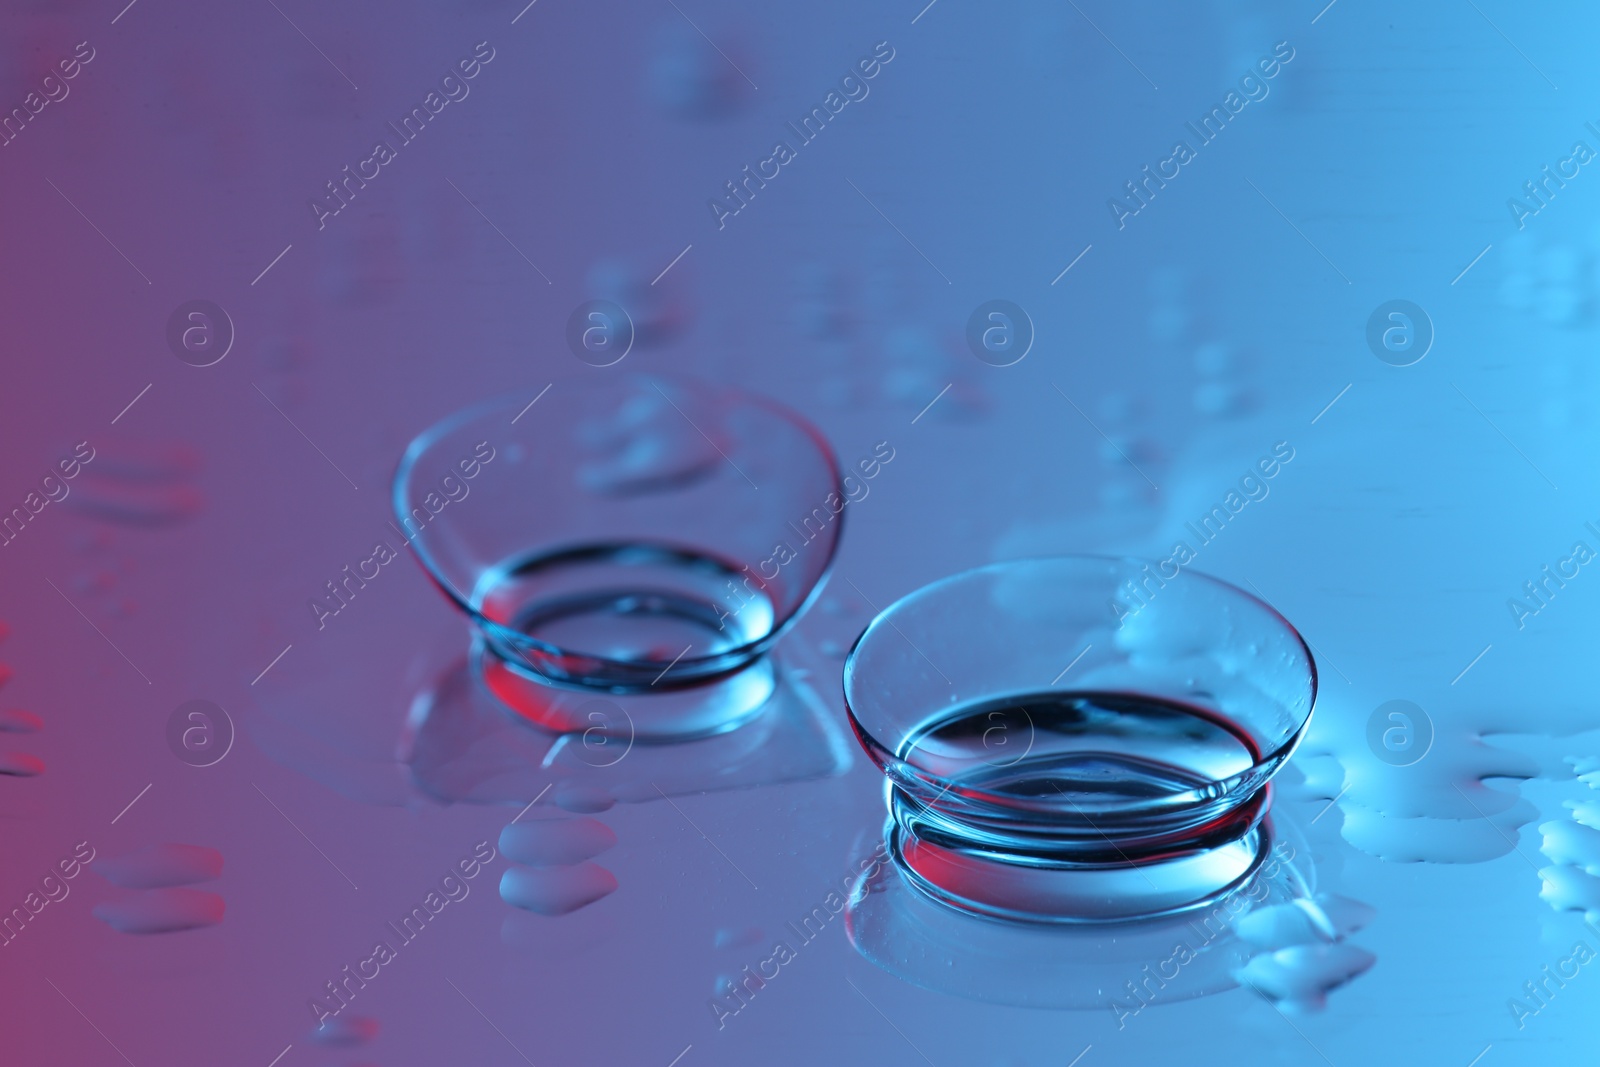 Photo of Pair of contact lenses on wet mirror surface